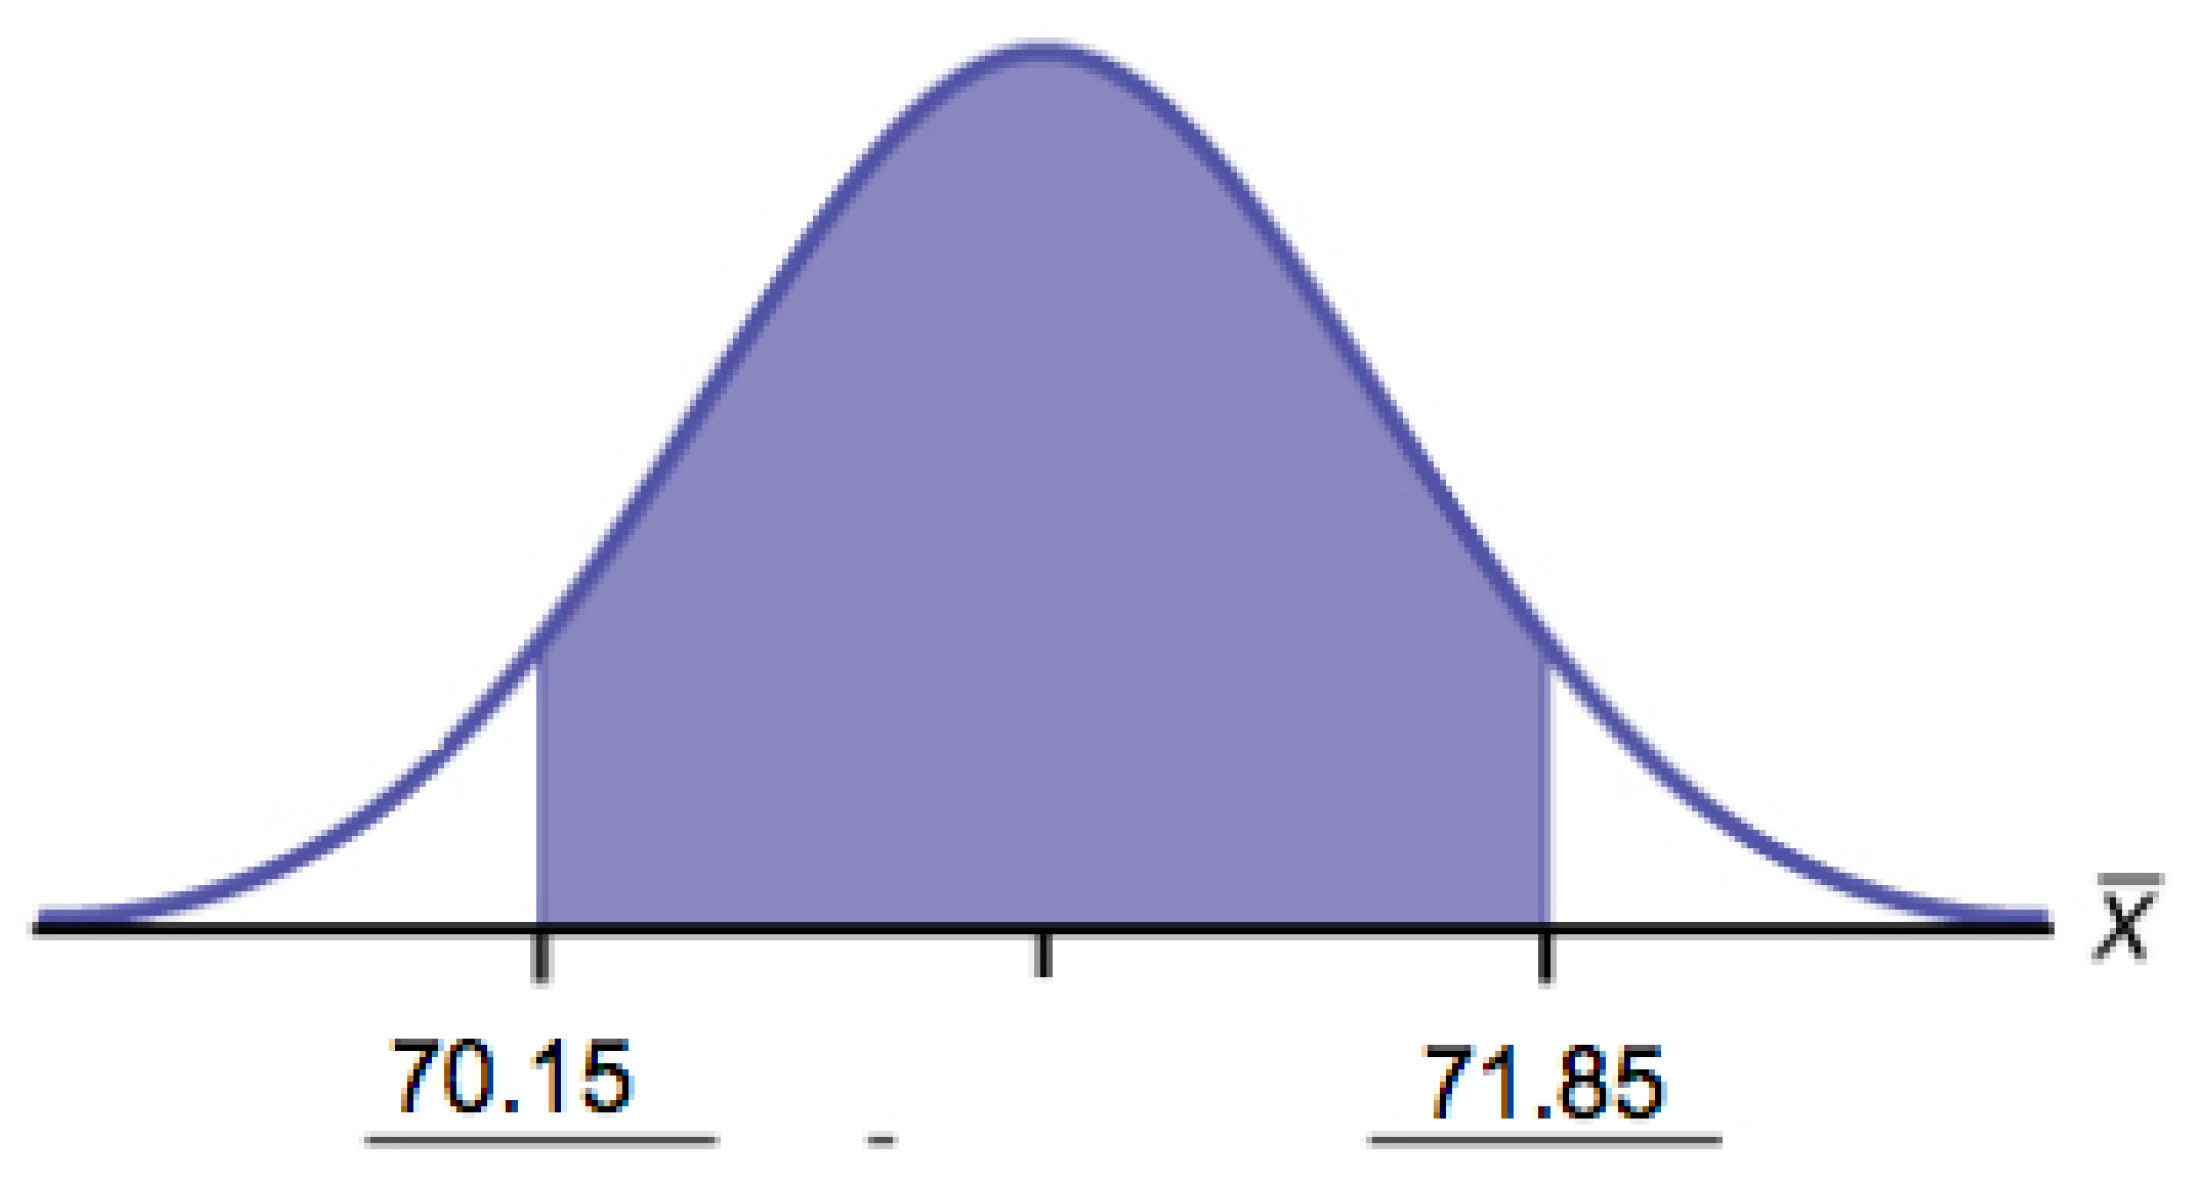 Normal distribution curve with two vertical upward lines from the x-axis to the curve. The area between these lines and under the curve is shaded. The left line has value 70.15 and the right line has value 71.85.